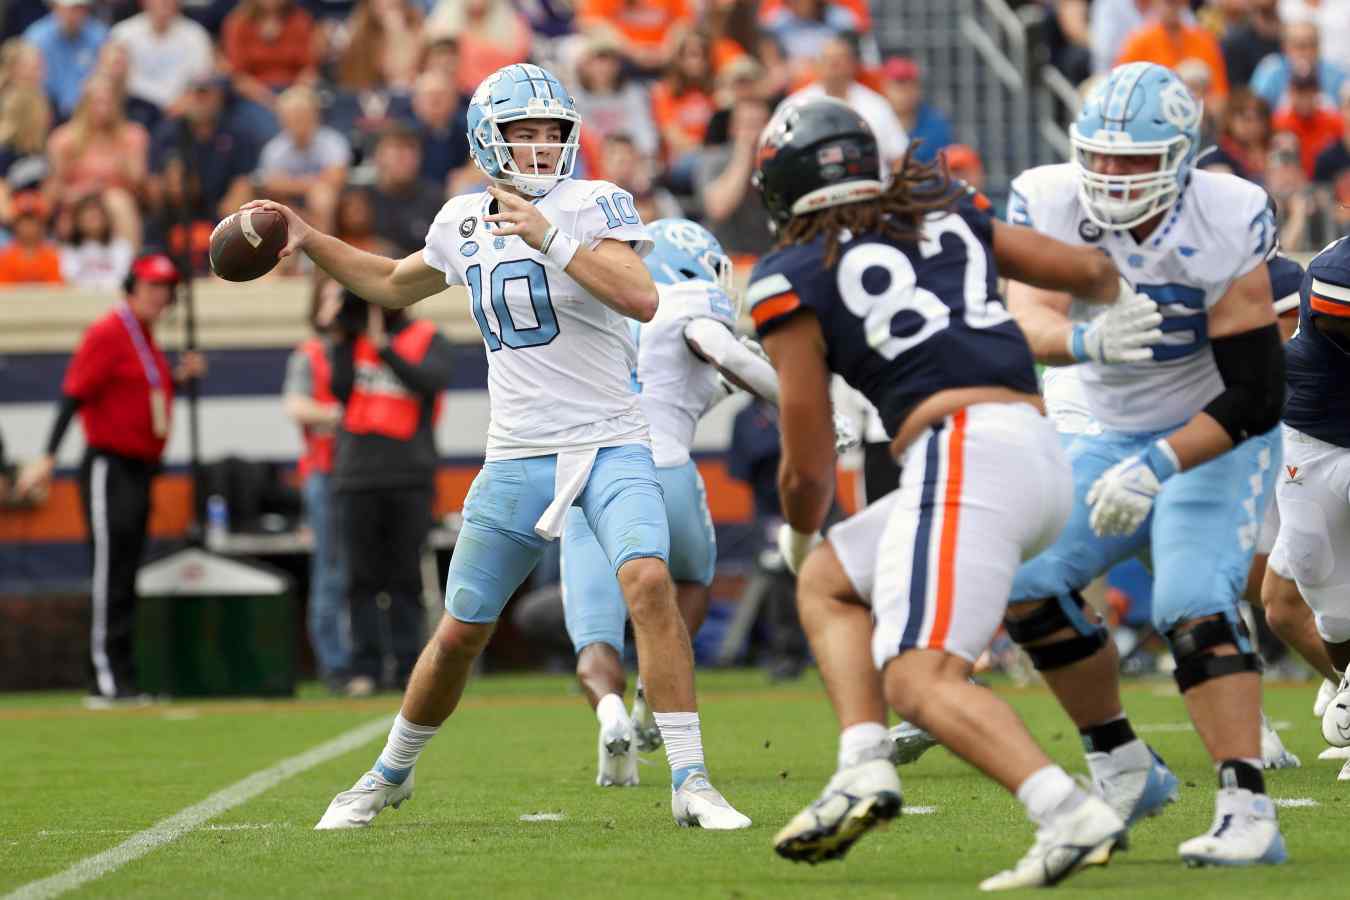 UNC vs NC State Football Live Stream How to Watch Online